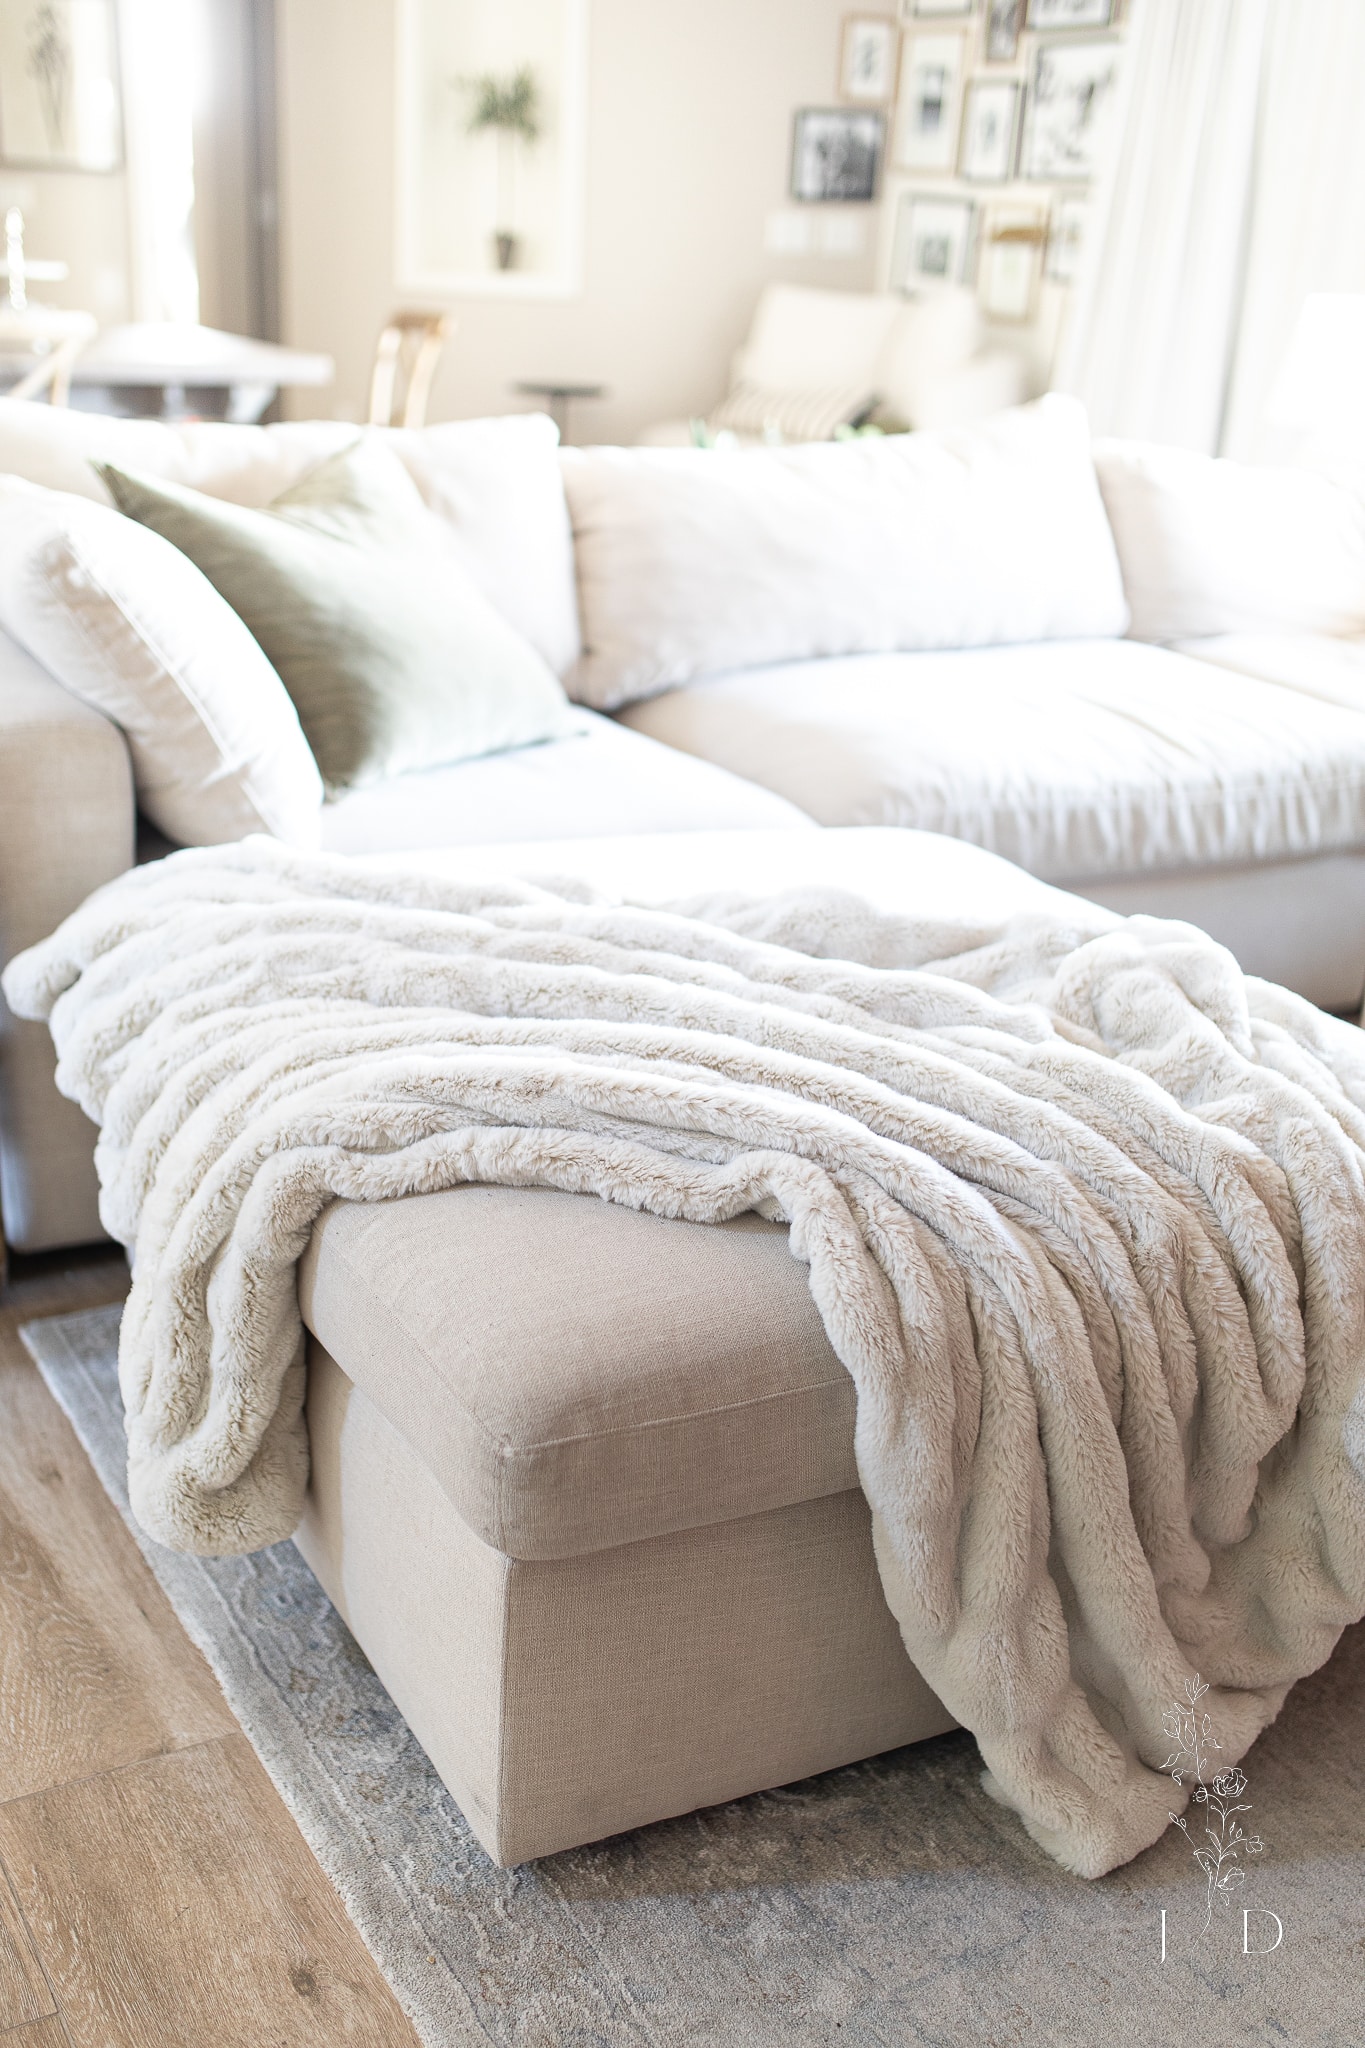 Coxy luxury blanket draped on a Arhaus sectional